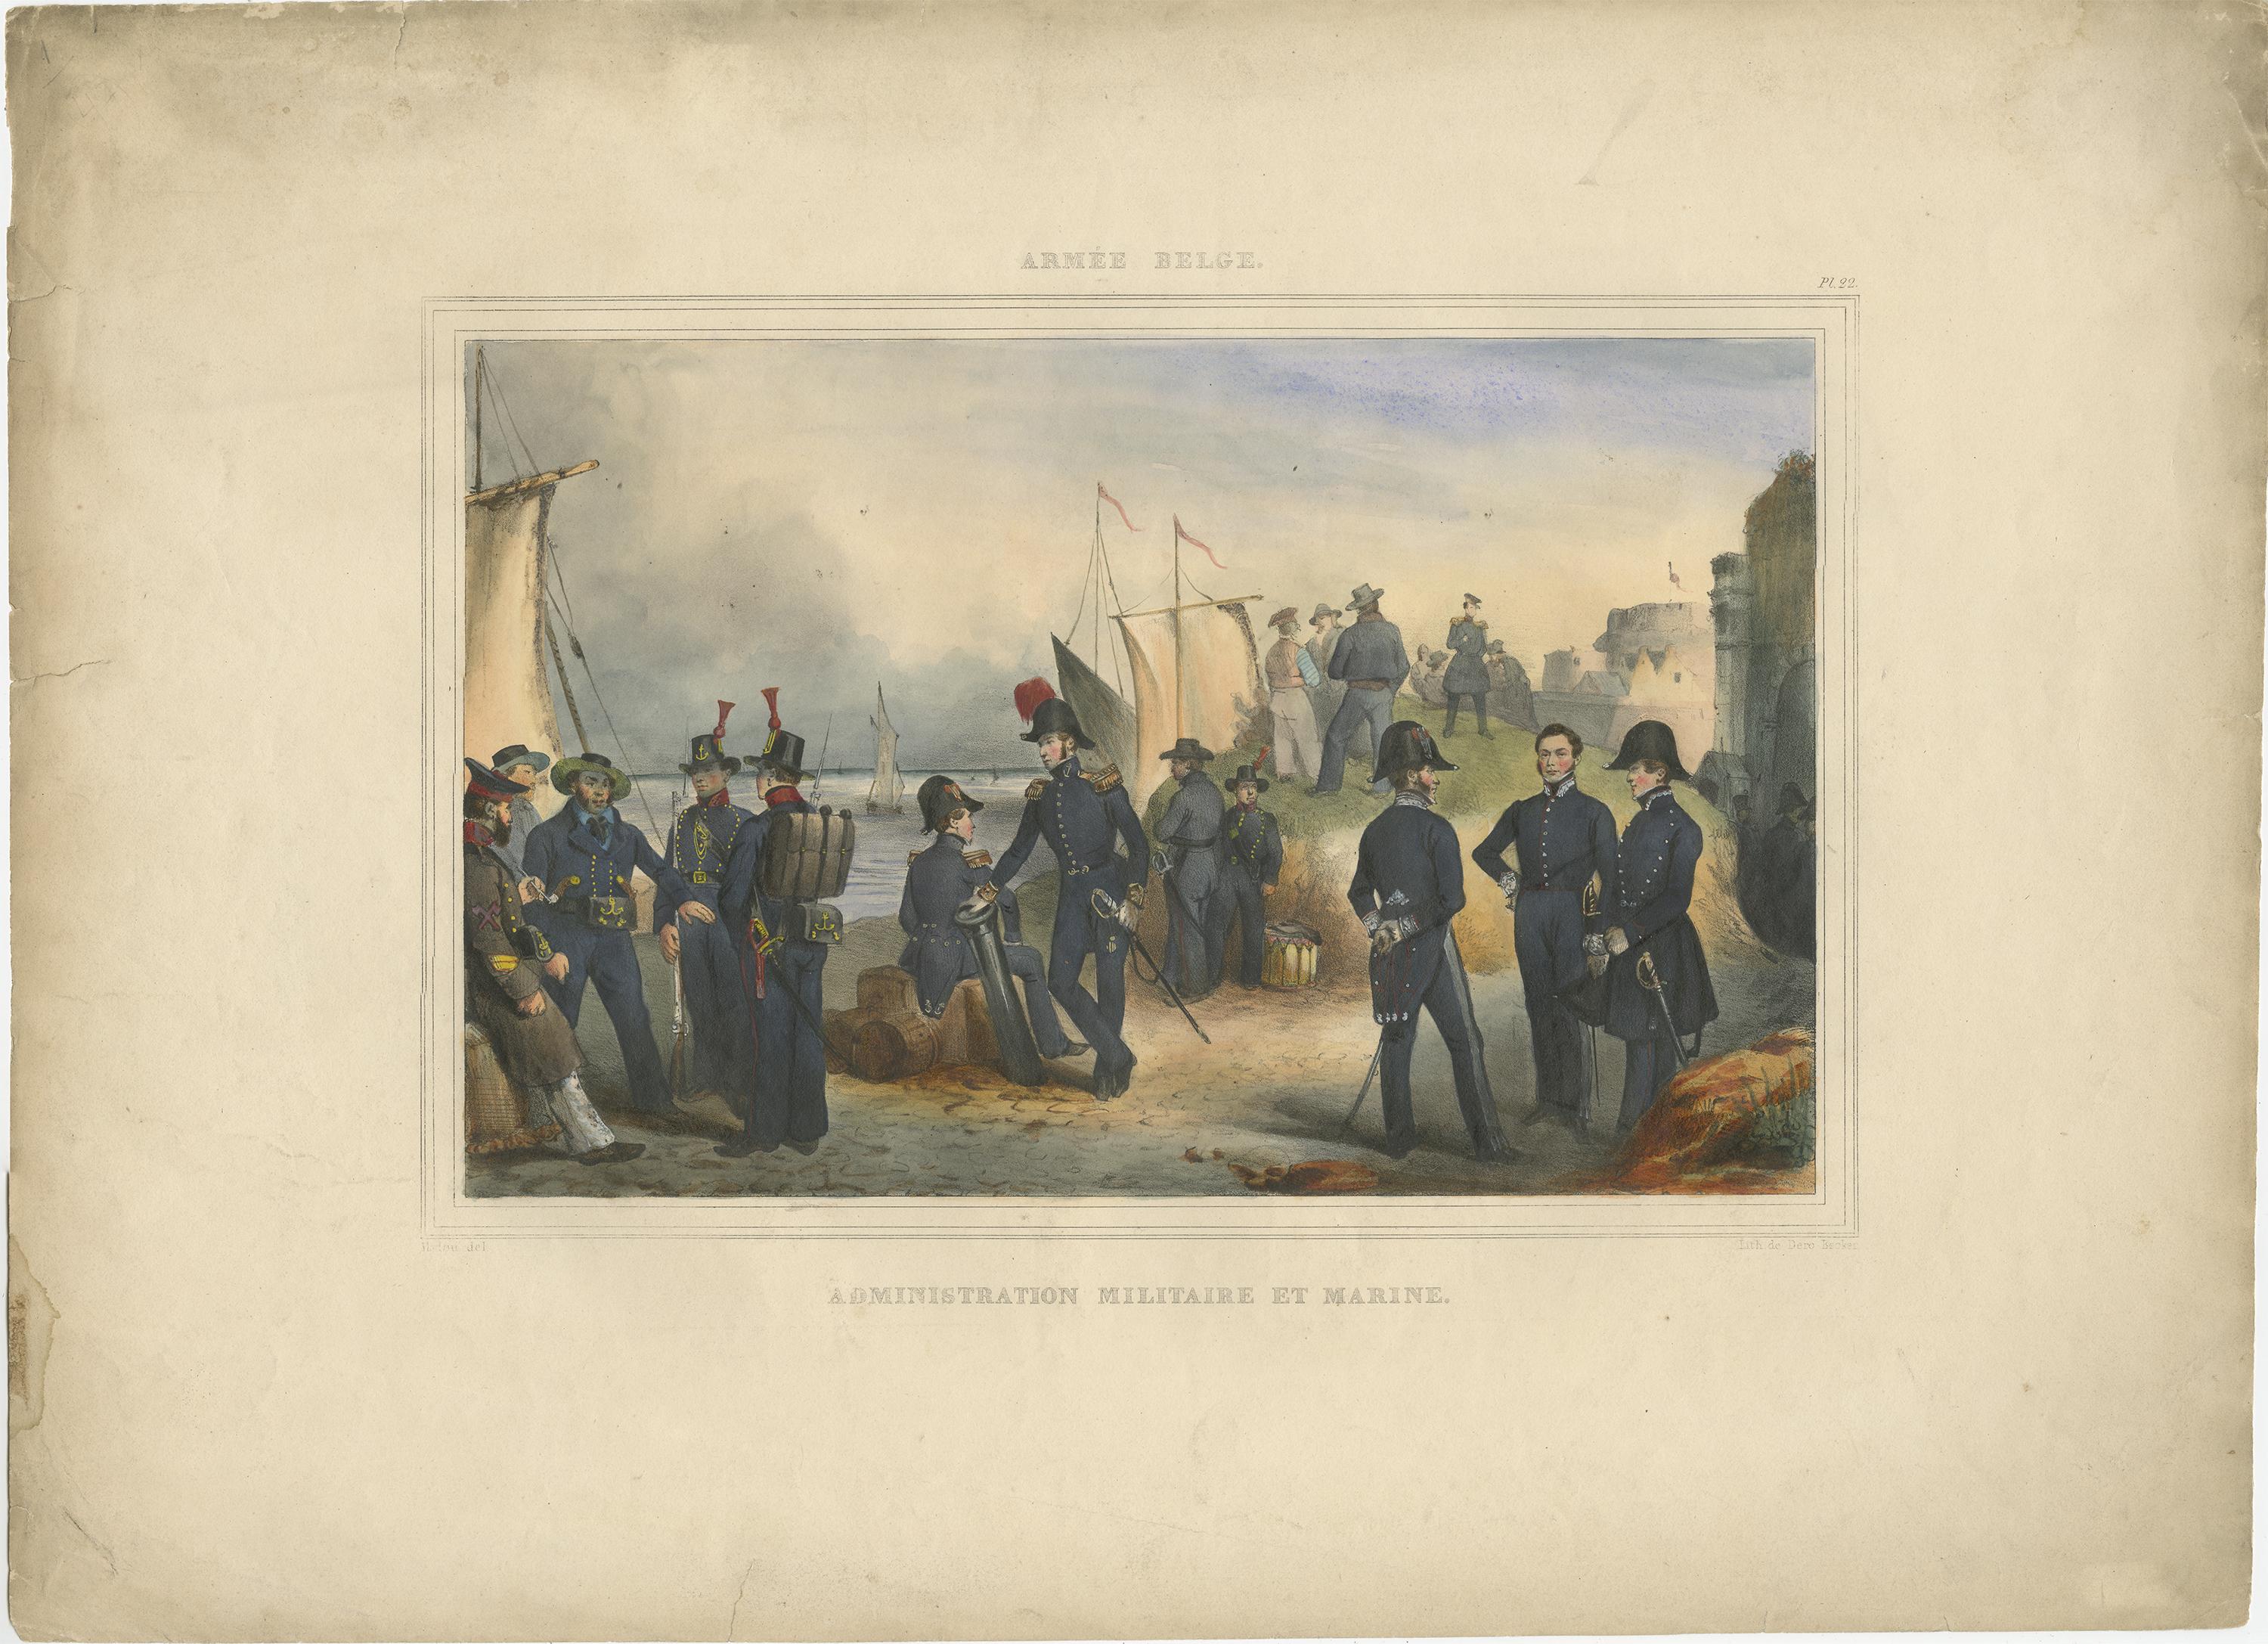 One nicely hand coloured print of an original serie of 23 plates, showing marine officers and soldiers discussing matters on the seaside. published in 1833. Rare.

From a serie of beautiful lithographed plates with Belgian military costumes after